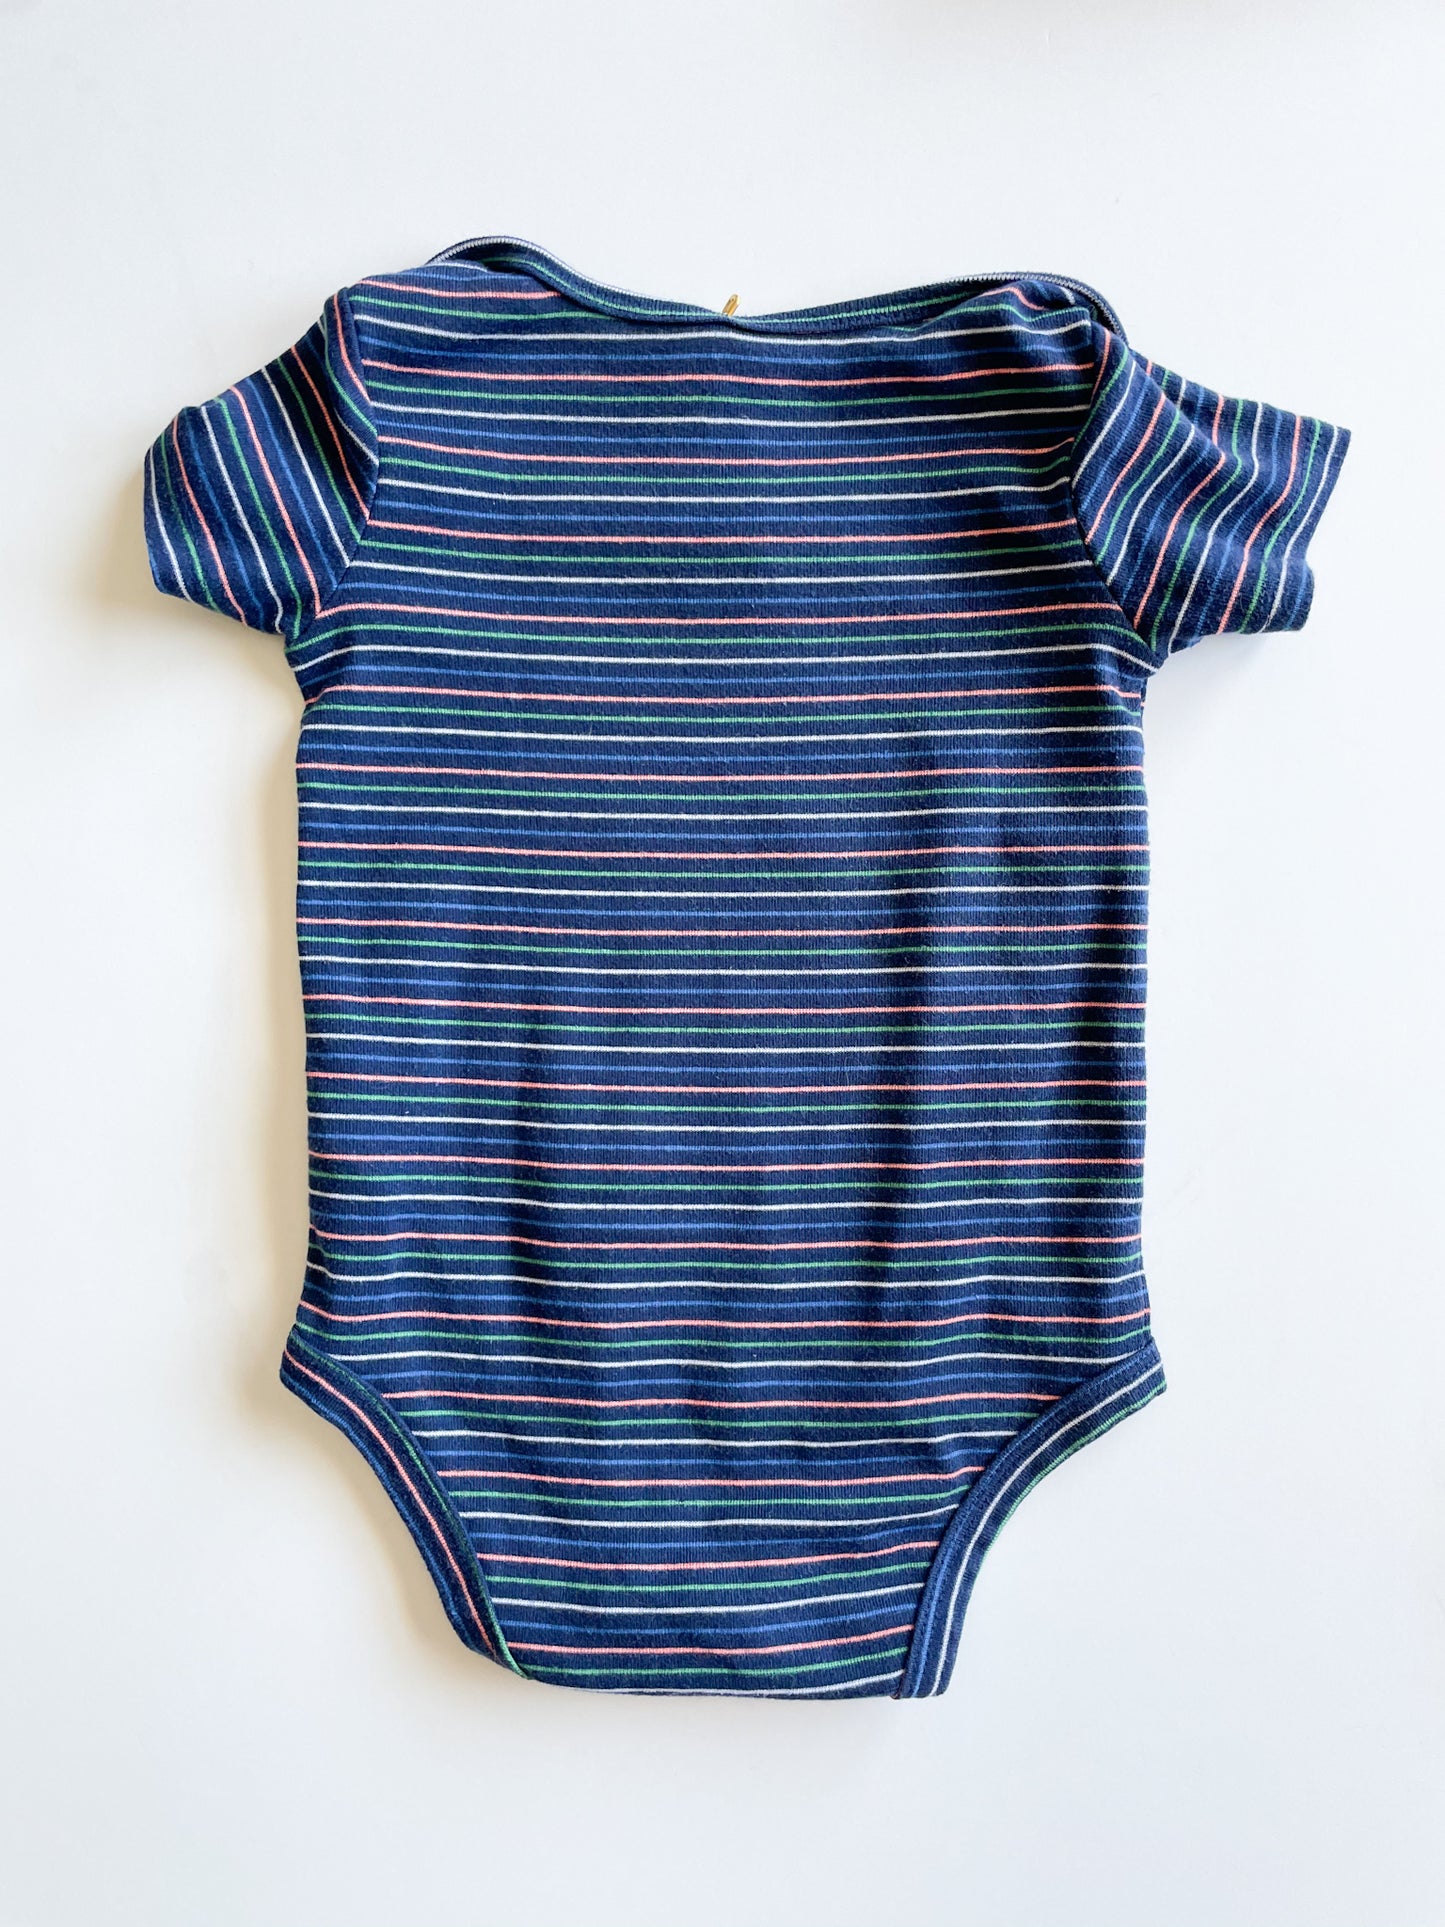 Navy Striped Bodysuit with Compass (Mommy & Me Option) - 18 months